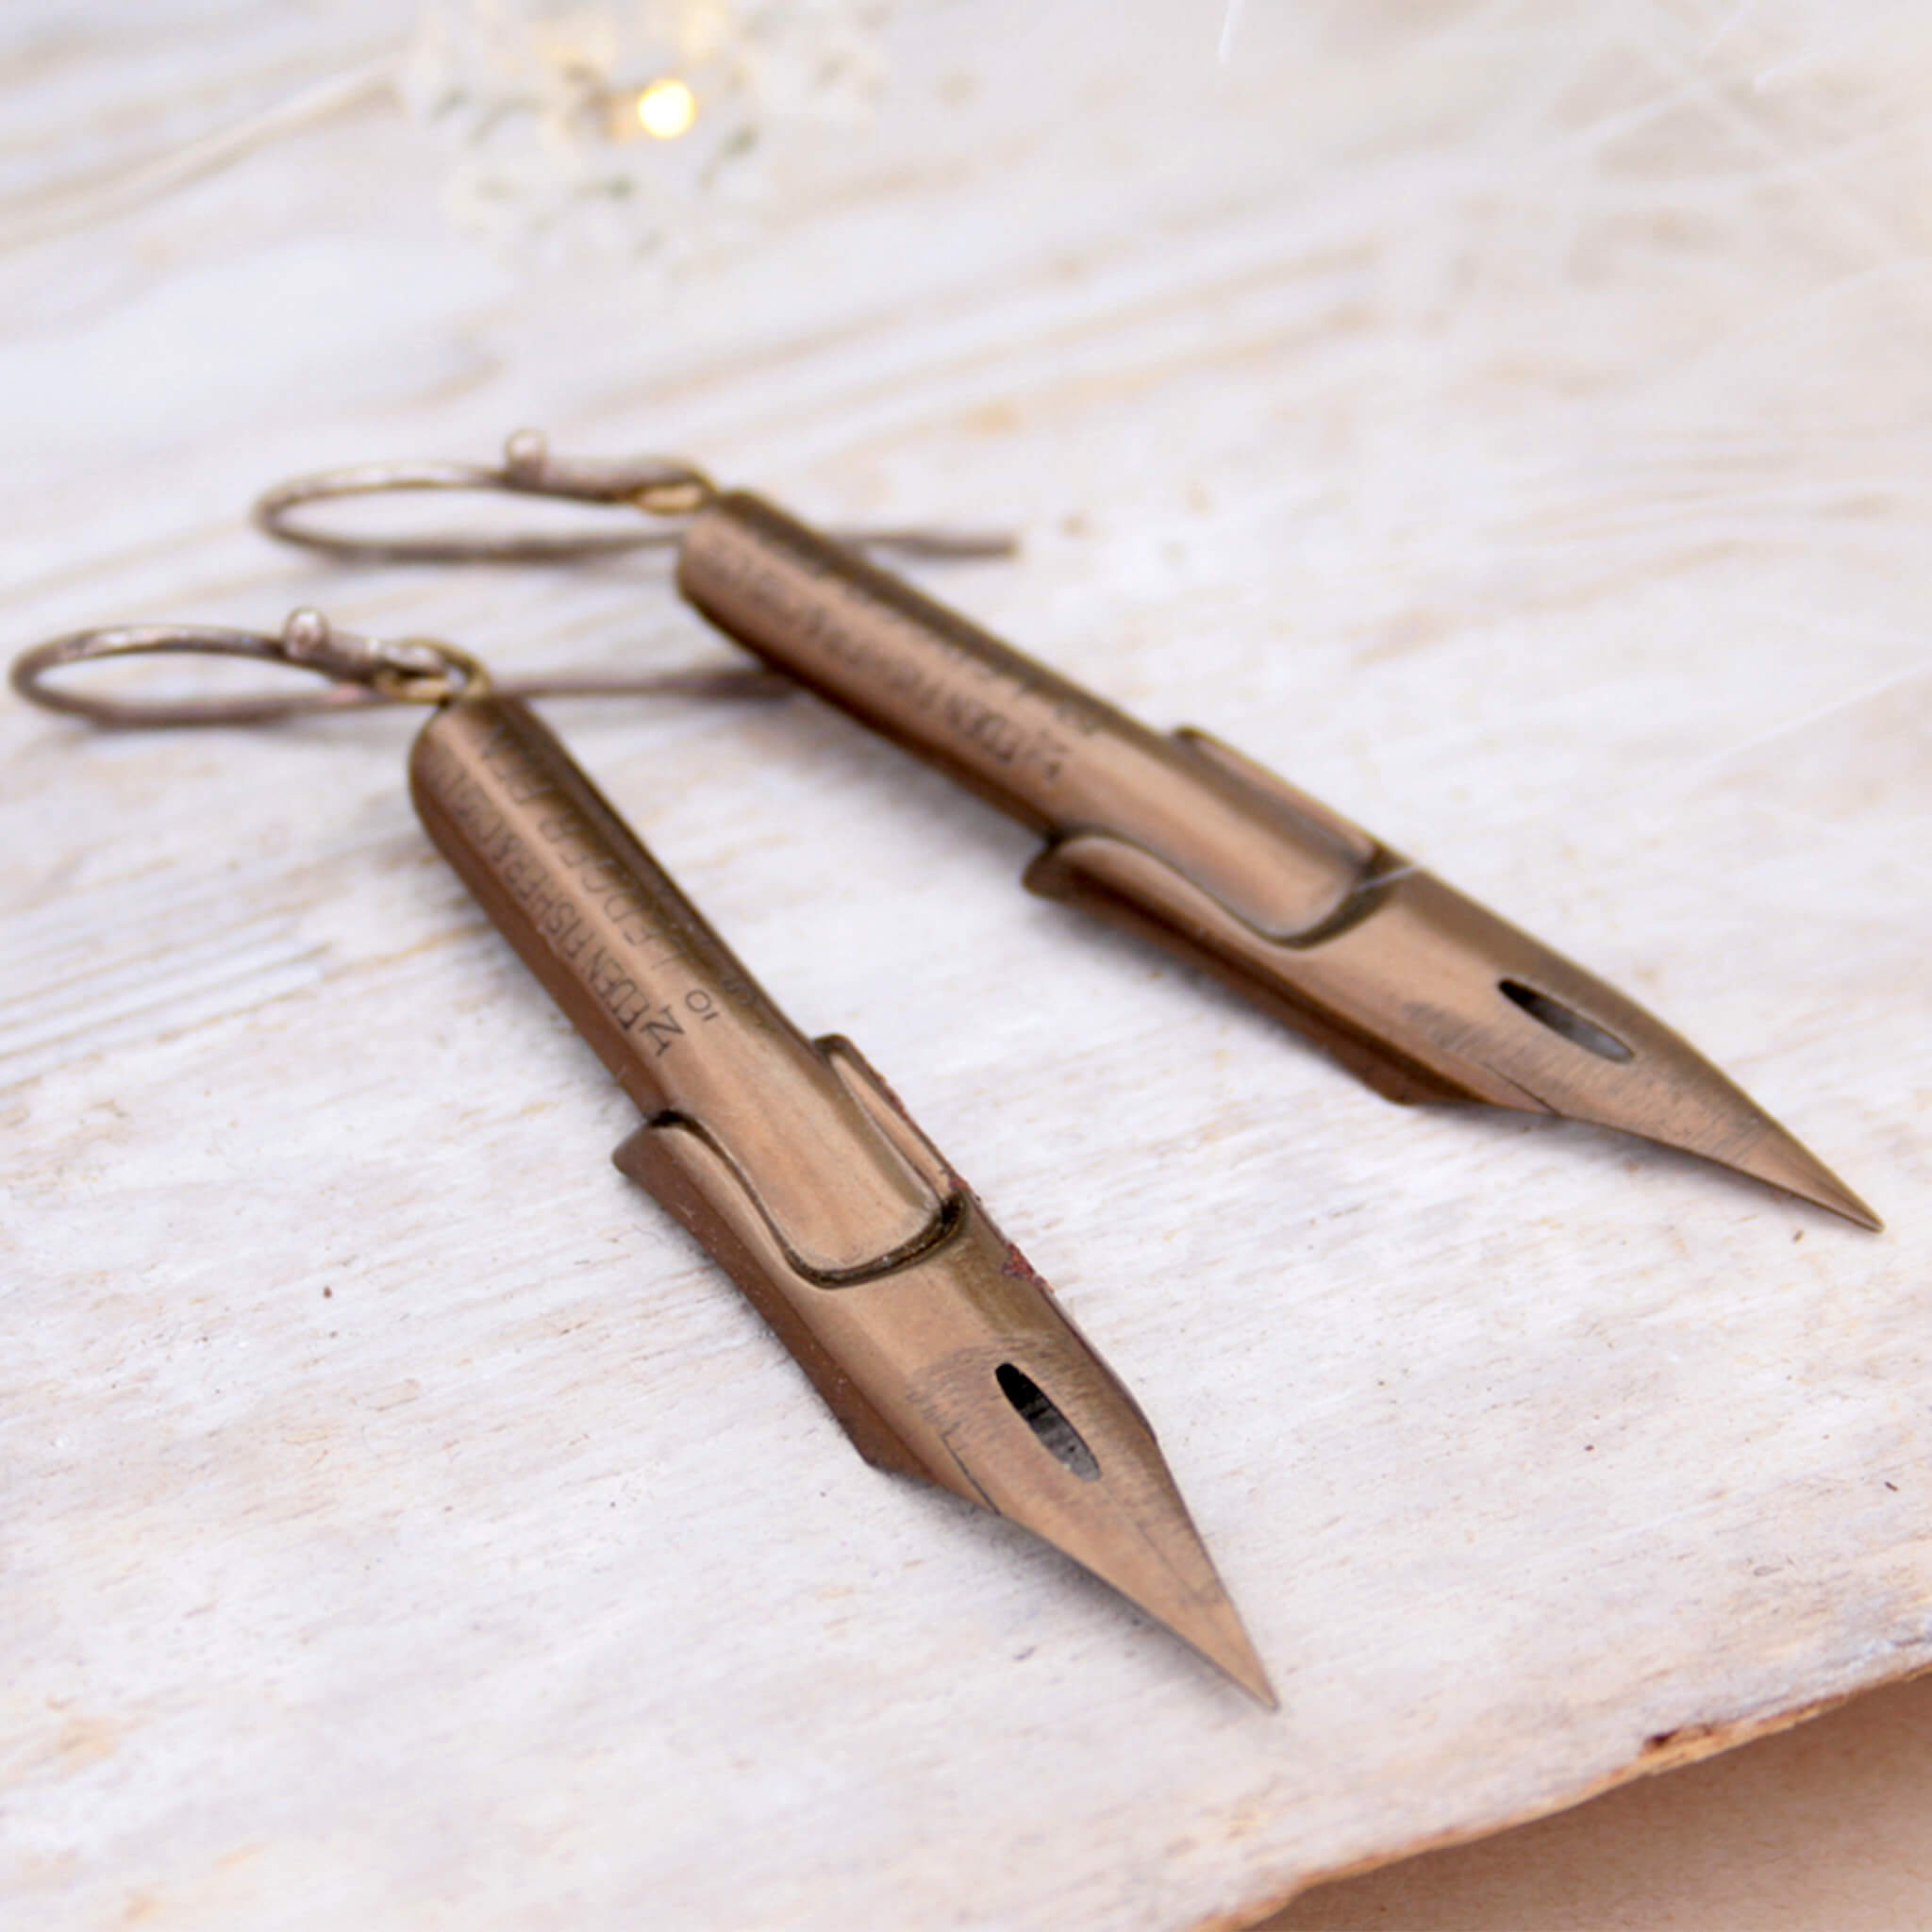 dark academia earrings made of pen nibs in bronze colour lying on a wooden plank painted white